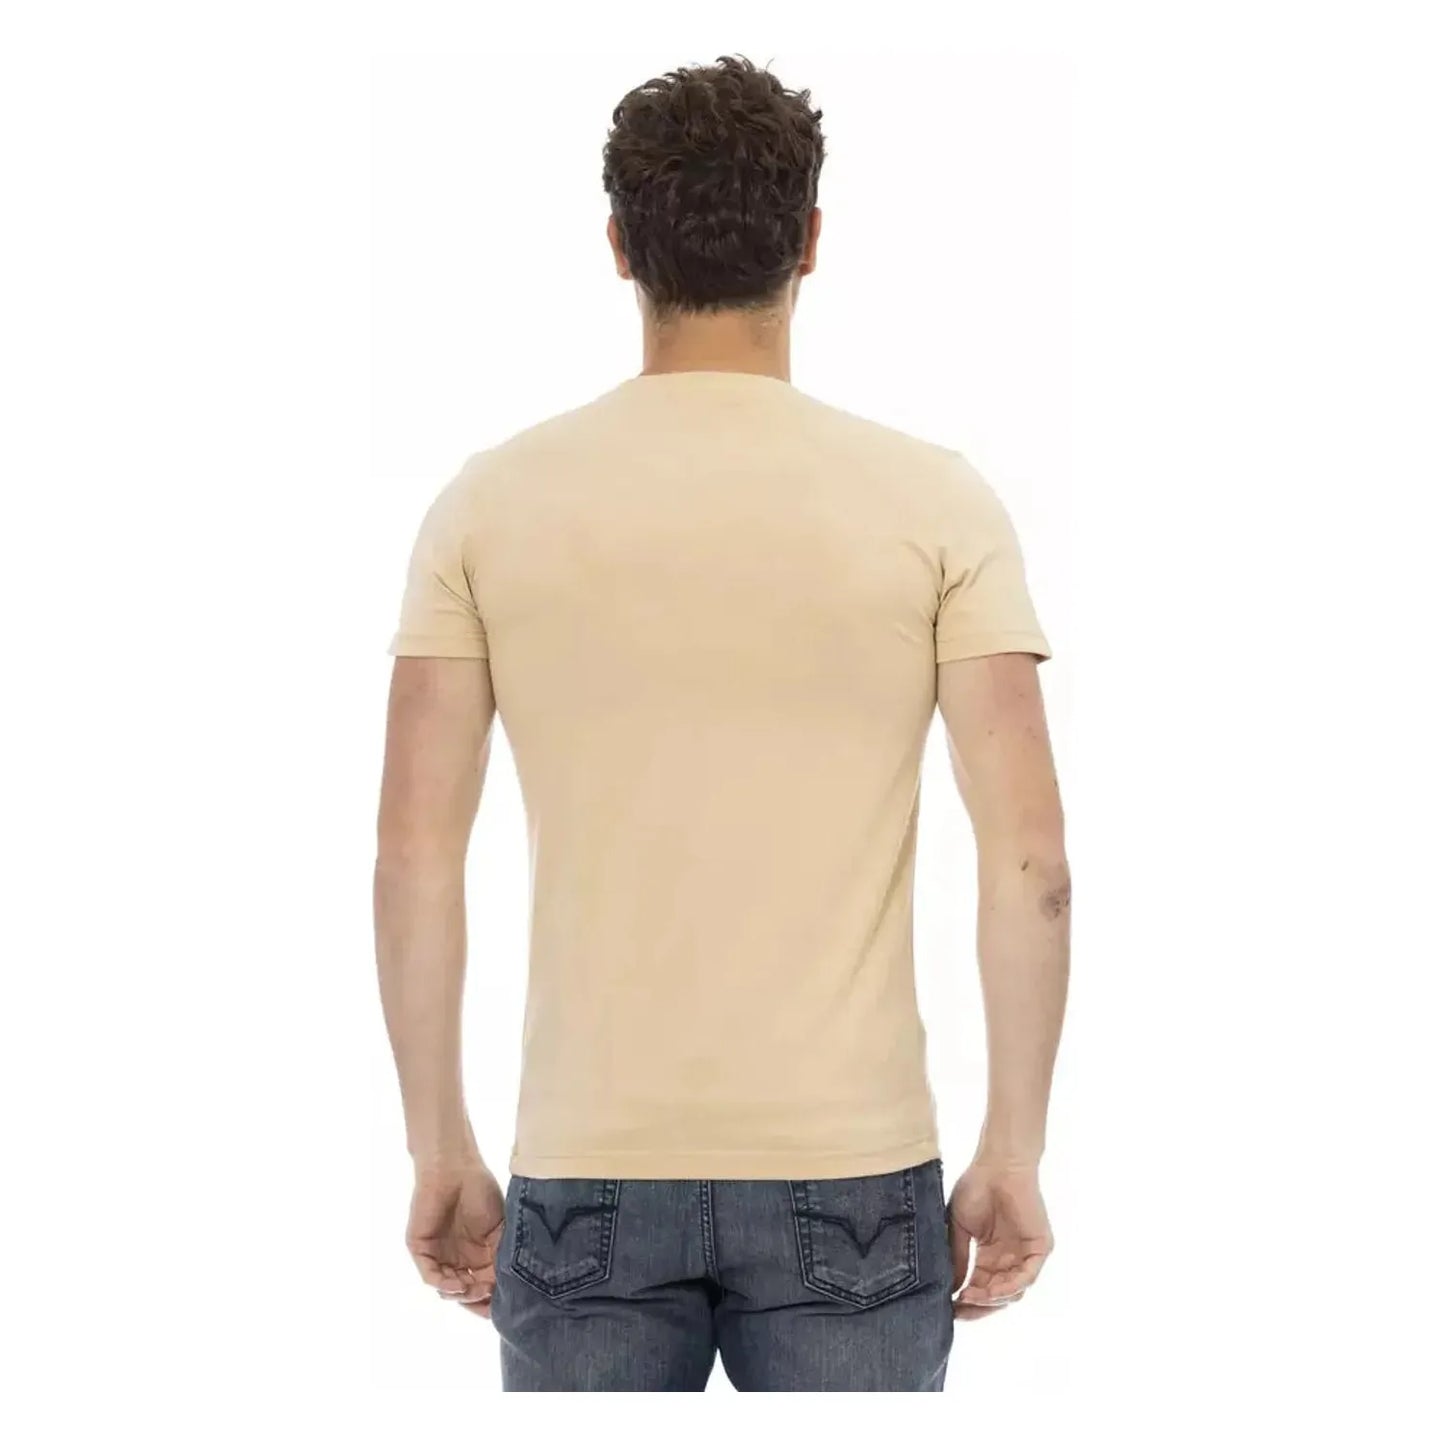 Trussardi Action Elevated Beige Short Sleeve T-Shirt with Chic Front Print beige-cotton-t-shirt-27